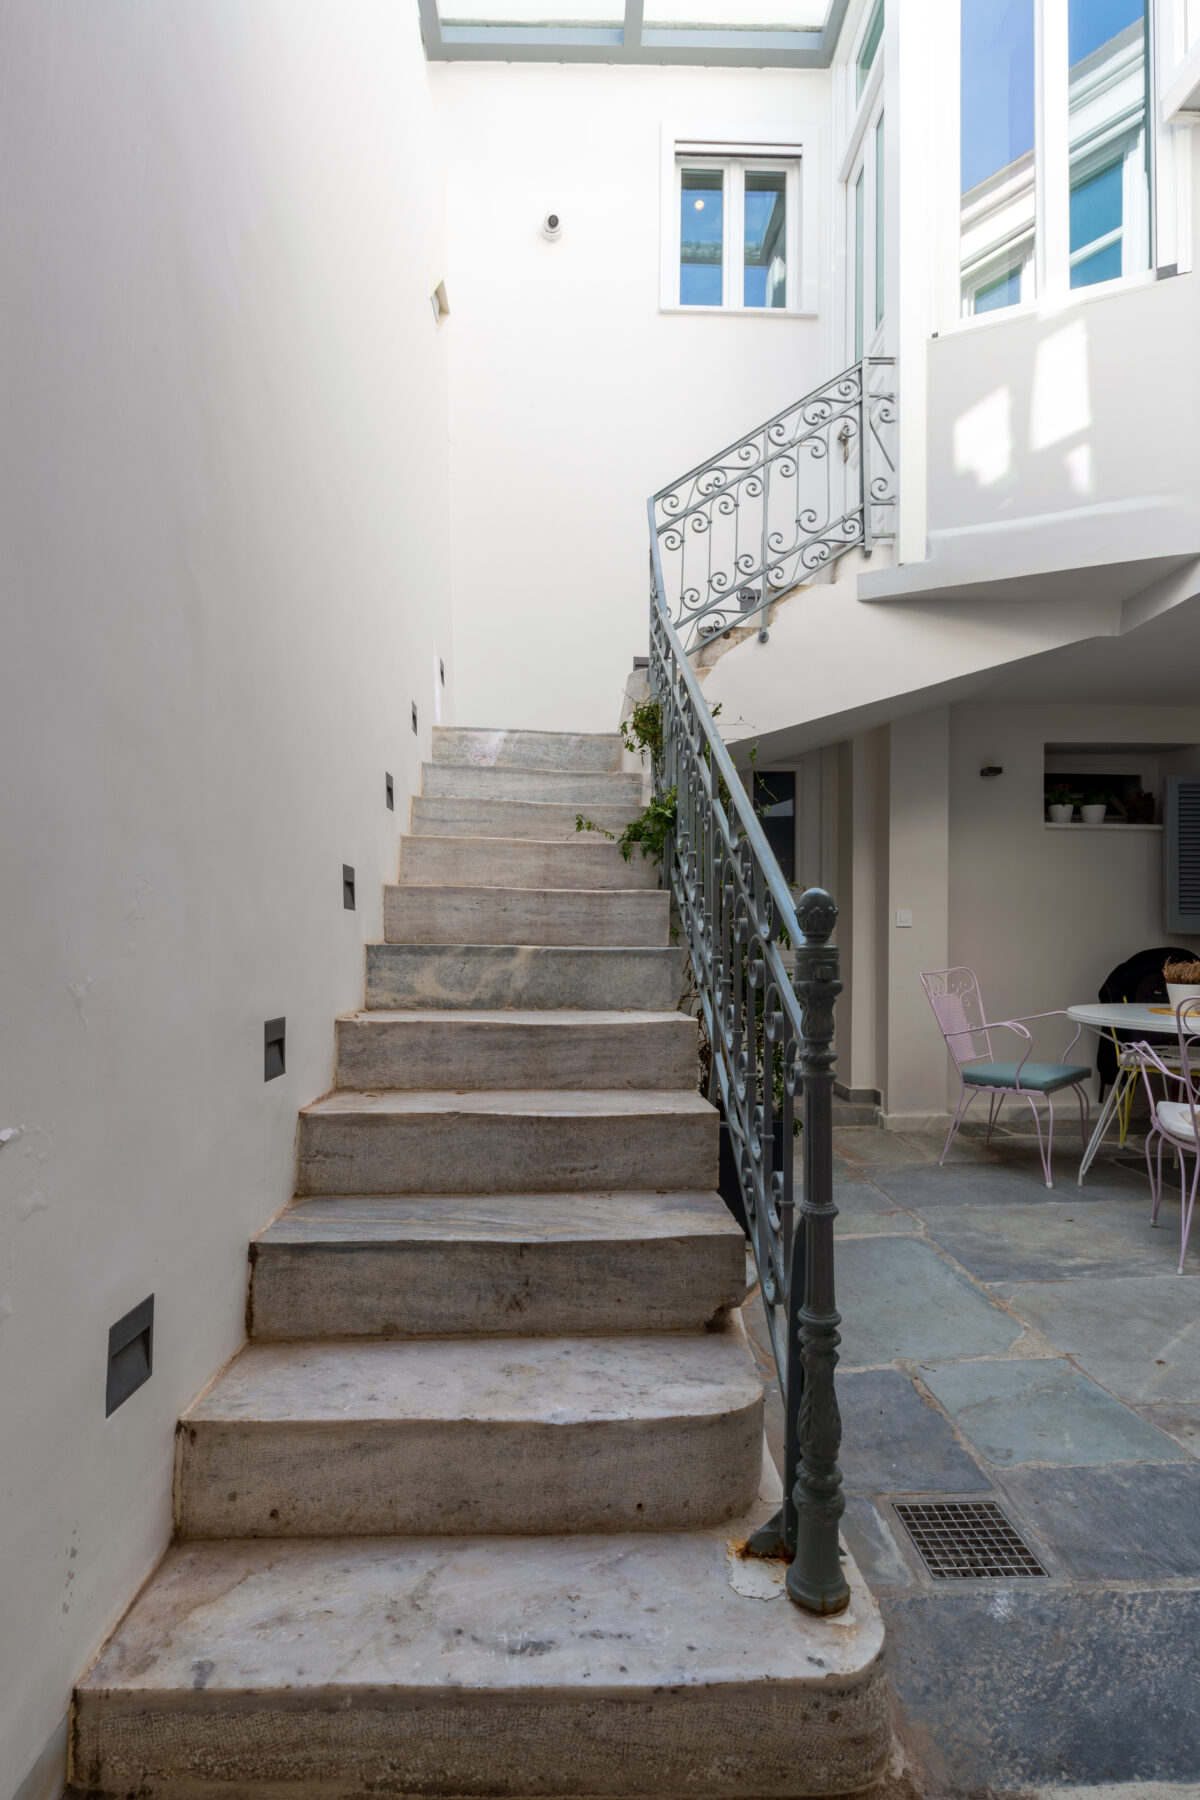 Archisearch Architect Anthi Oikonomou completed the revival of a two-storey listed building in Plaka, Athens